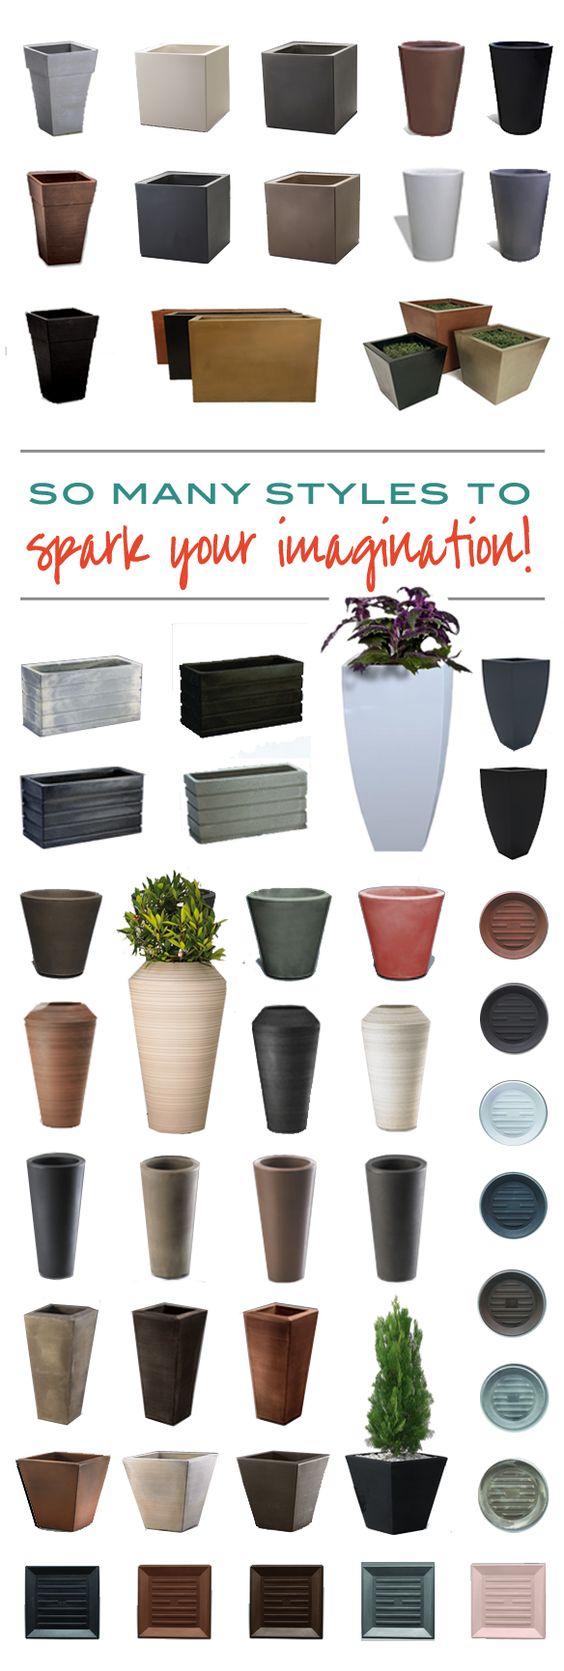 Plant Pots to Choose From